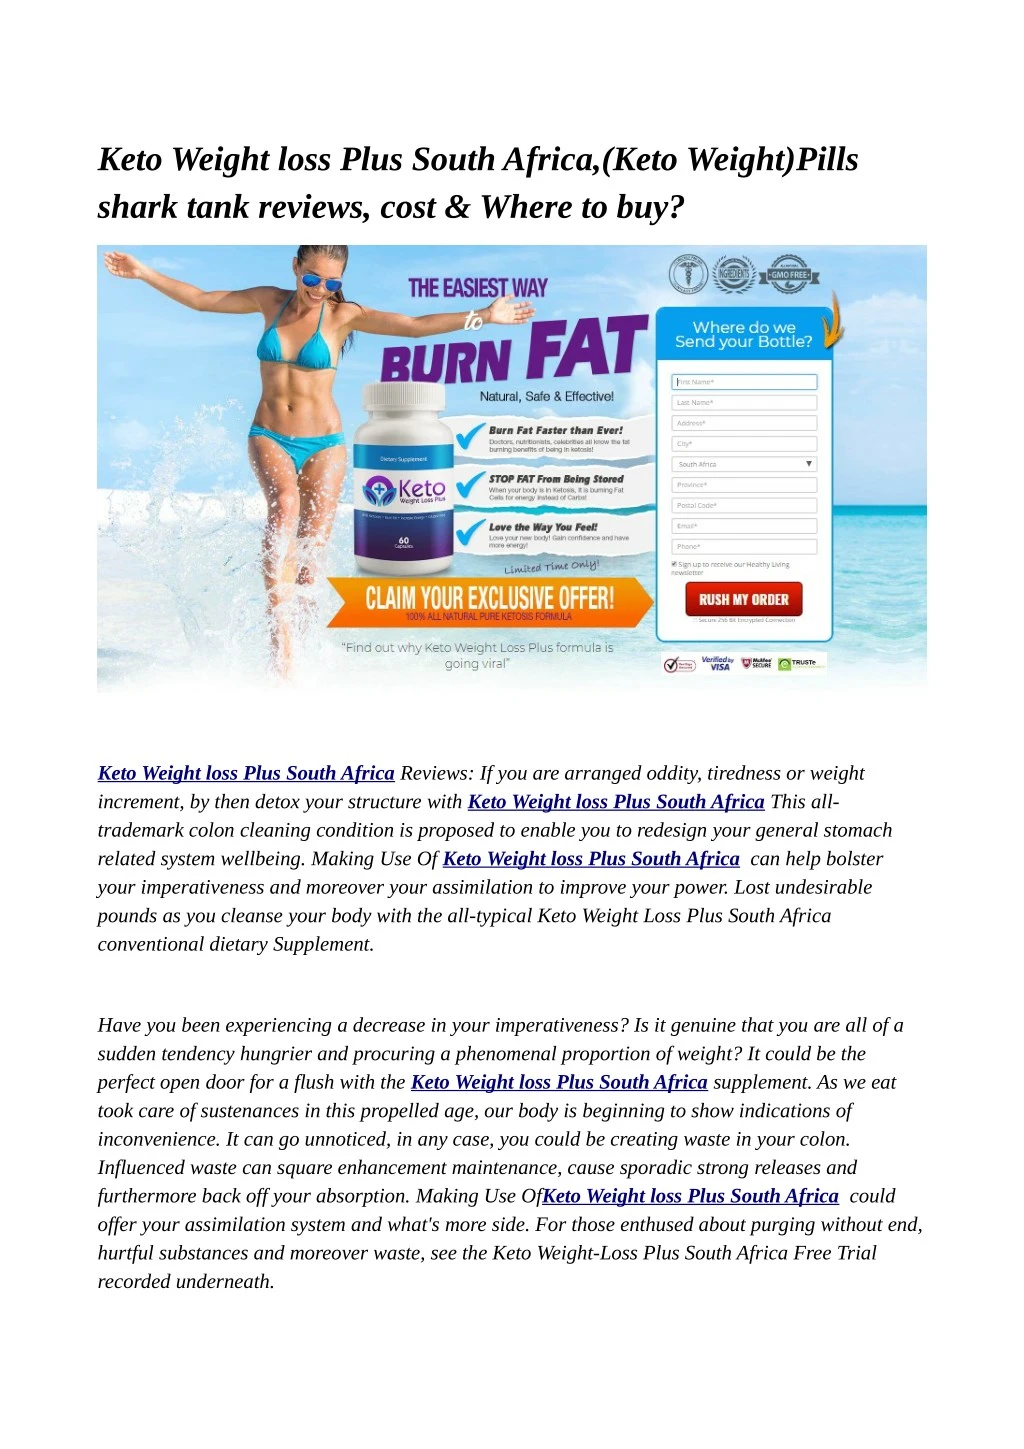 keto weight loss plus south africa keto weight